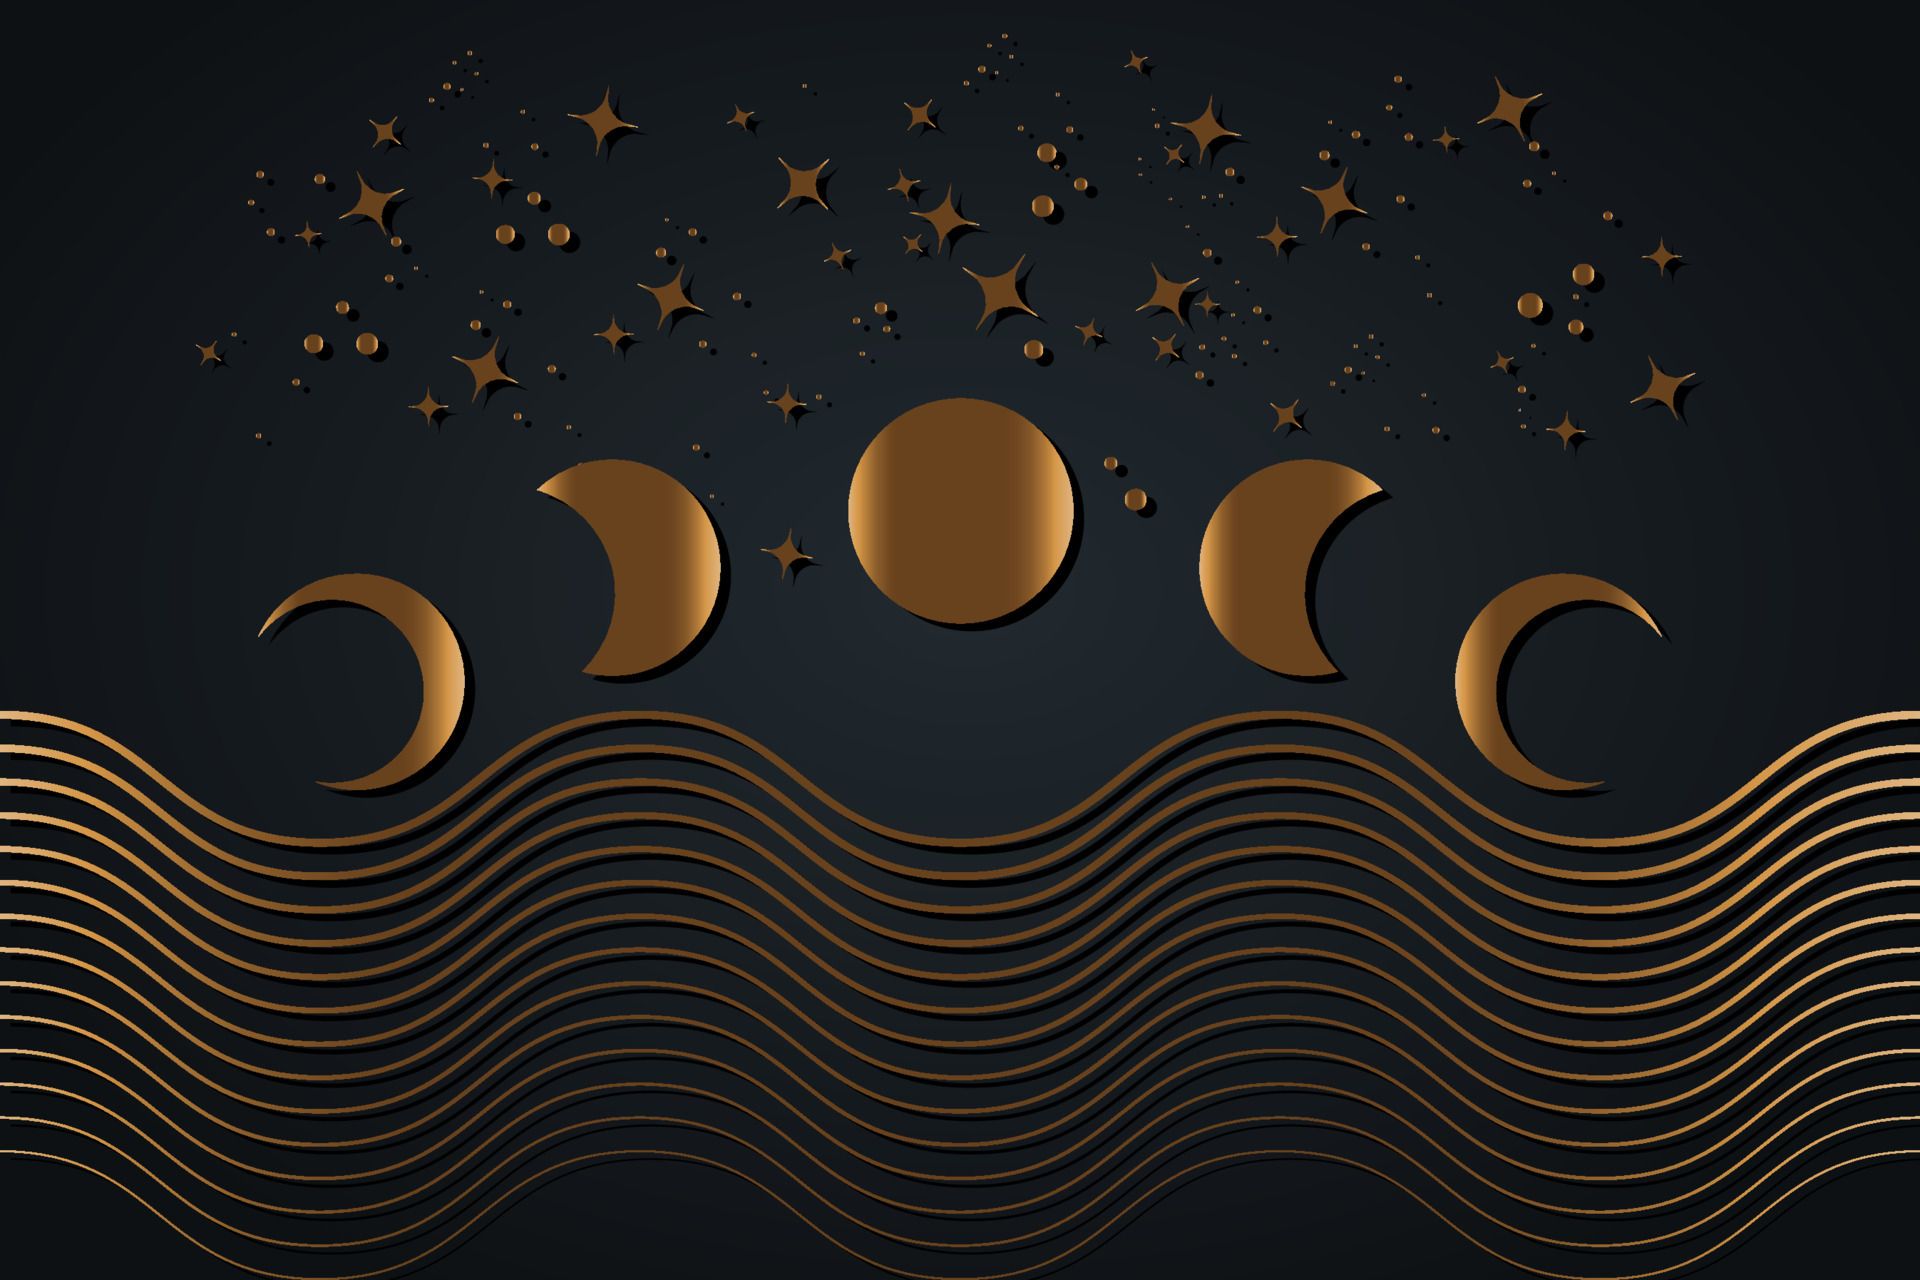 Celestial Moon phases, geometric waves, stars sky. Abstract contemporary aesthetic background. Boho wall decor modern minimalist art print. Organic natural shape magic concept vector isolated on black